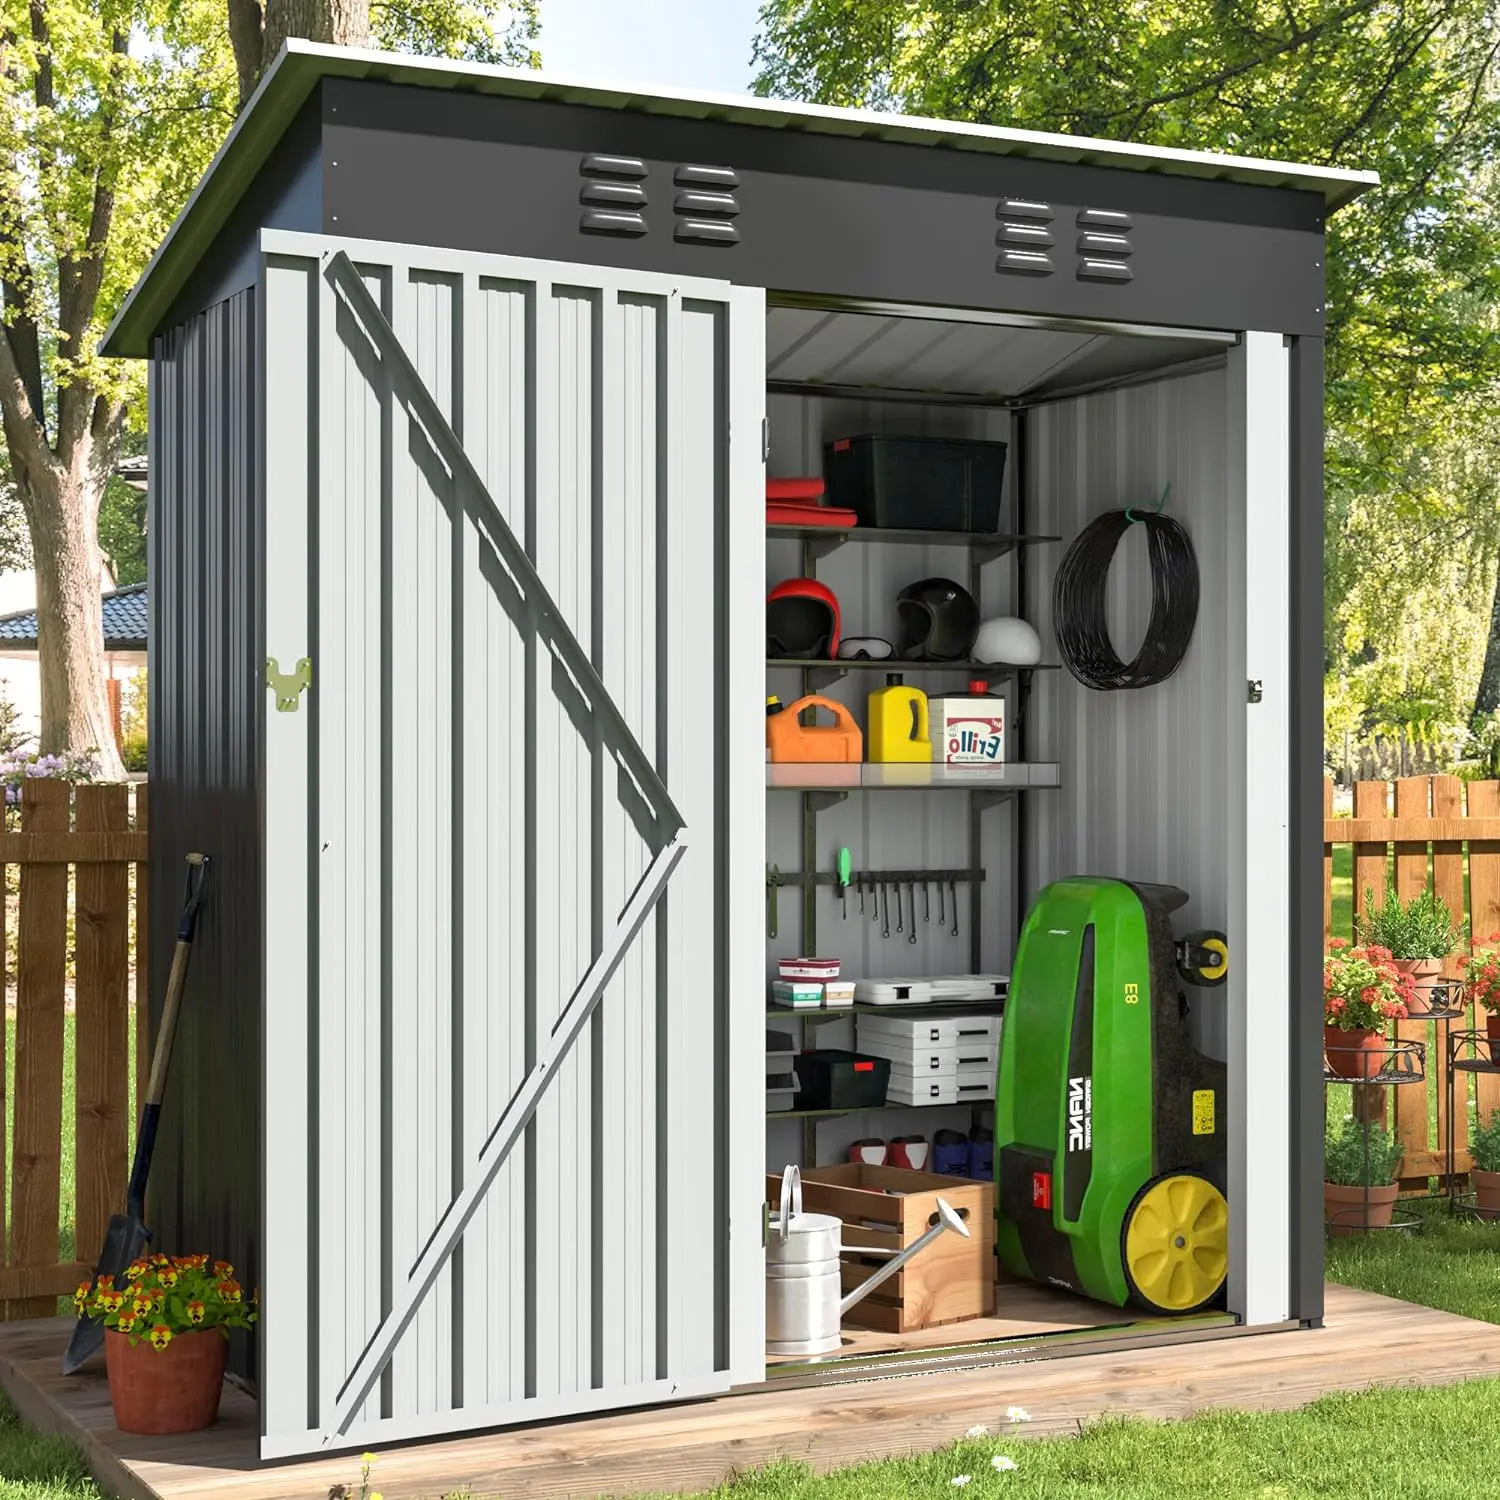 4.5x2.5 FT Outdoor Storage Shed, Large Garden Shed with Updated Frame Structure&Lockable Doors, Metal Tool Sheds for Patio,Black